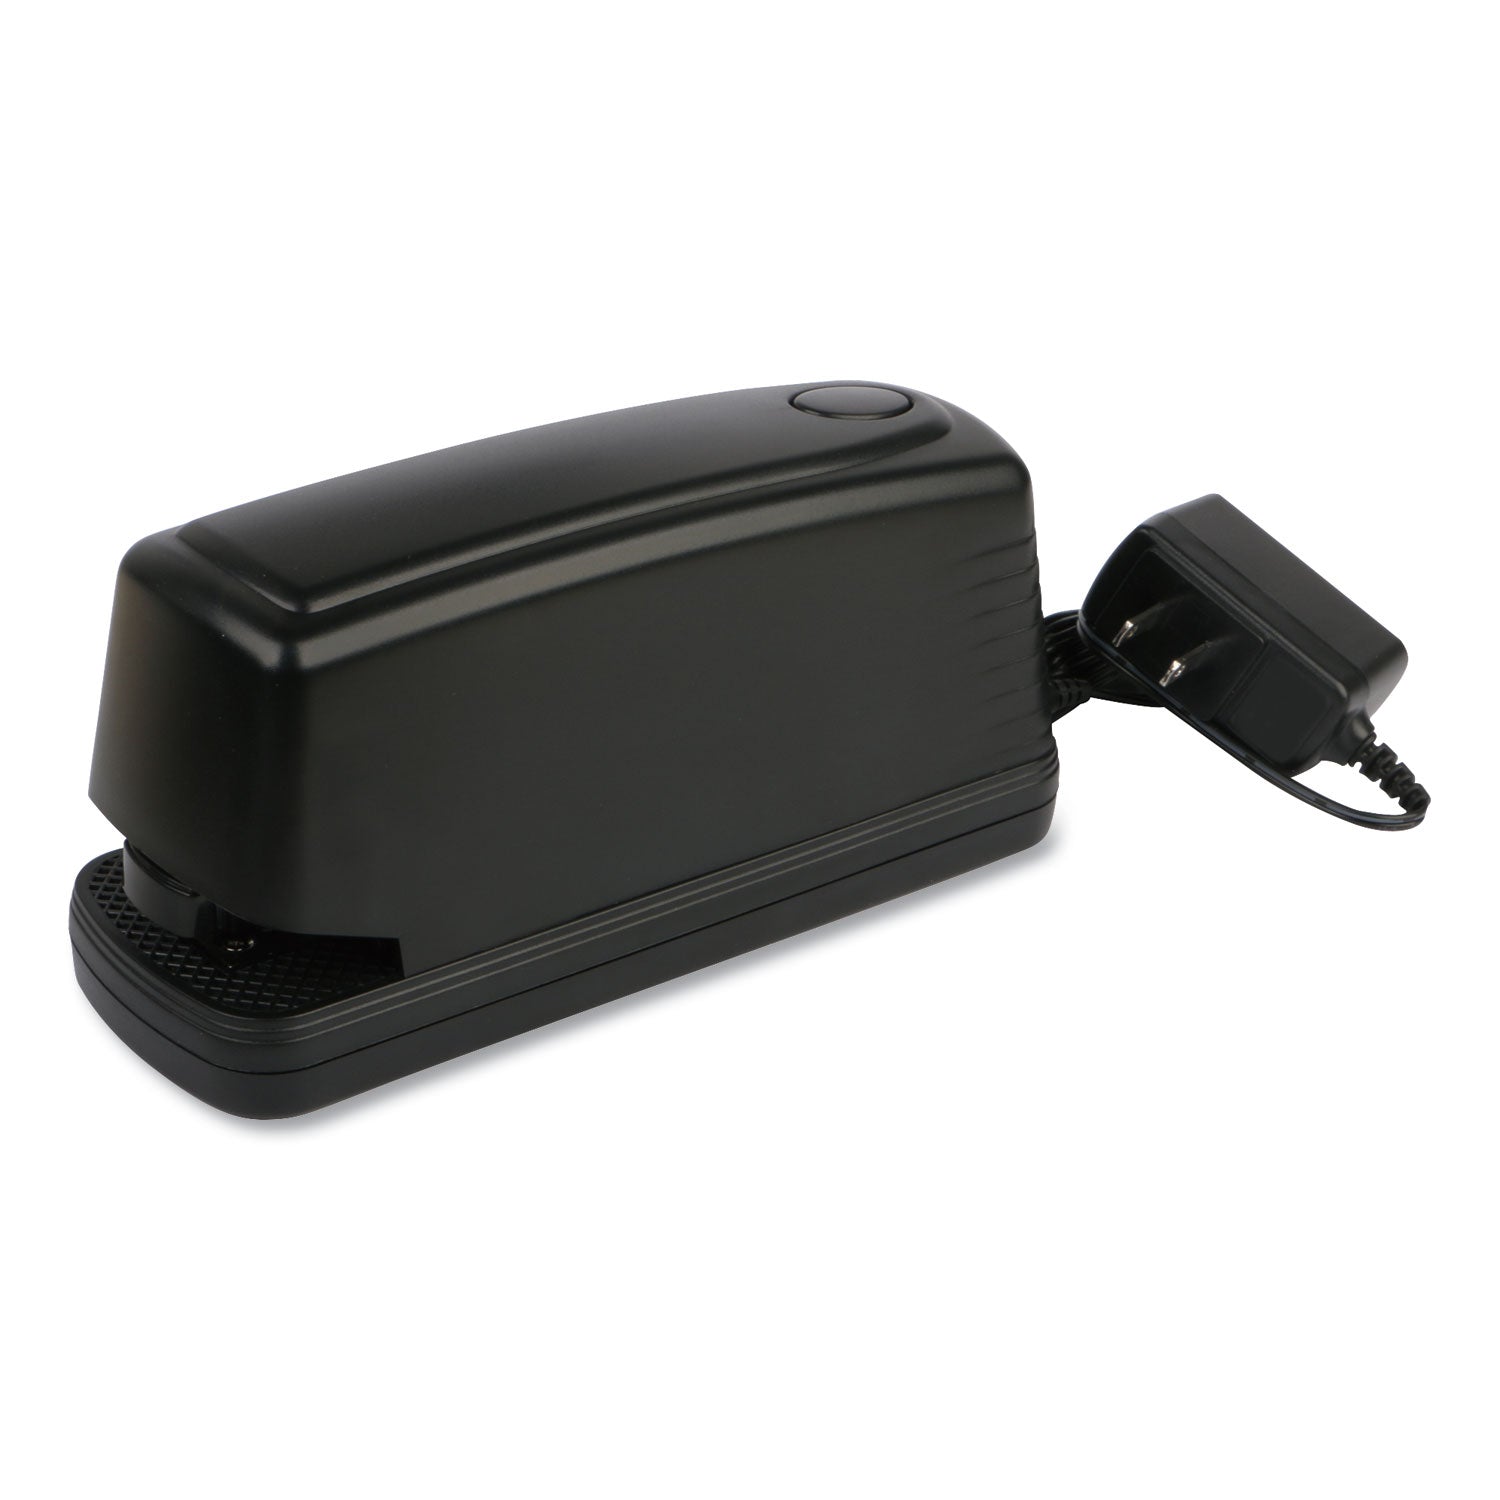 electric-stapler-with-staple-channel-release-button-20-sheet-capacity-black_unv43122 - 1